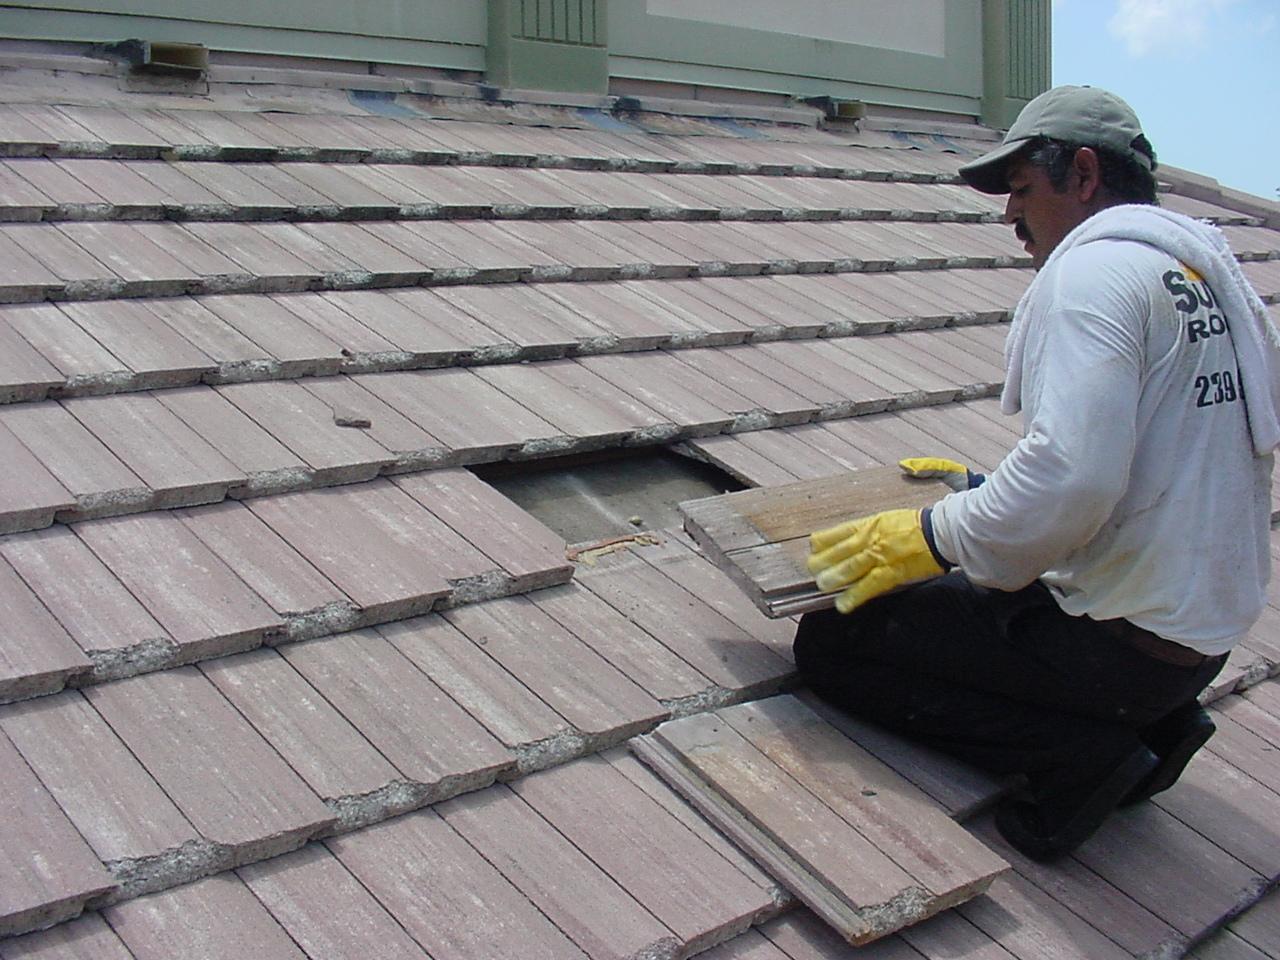 How Often Do Tile Roofs Need To Be Replaced?